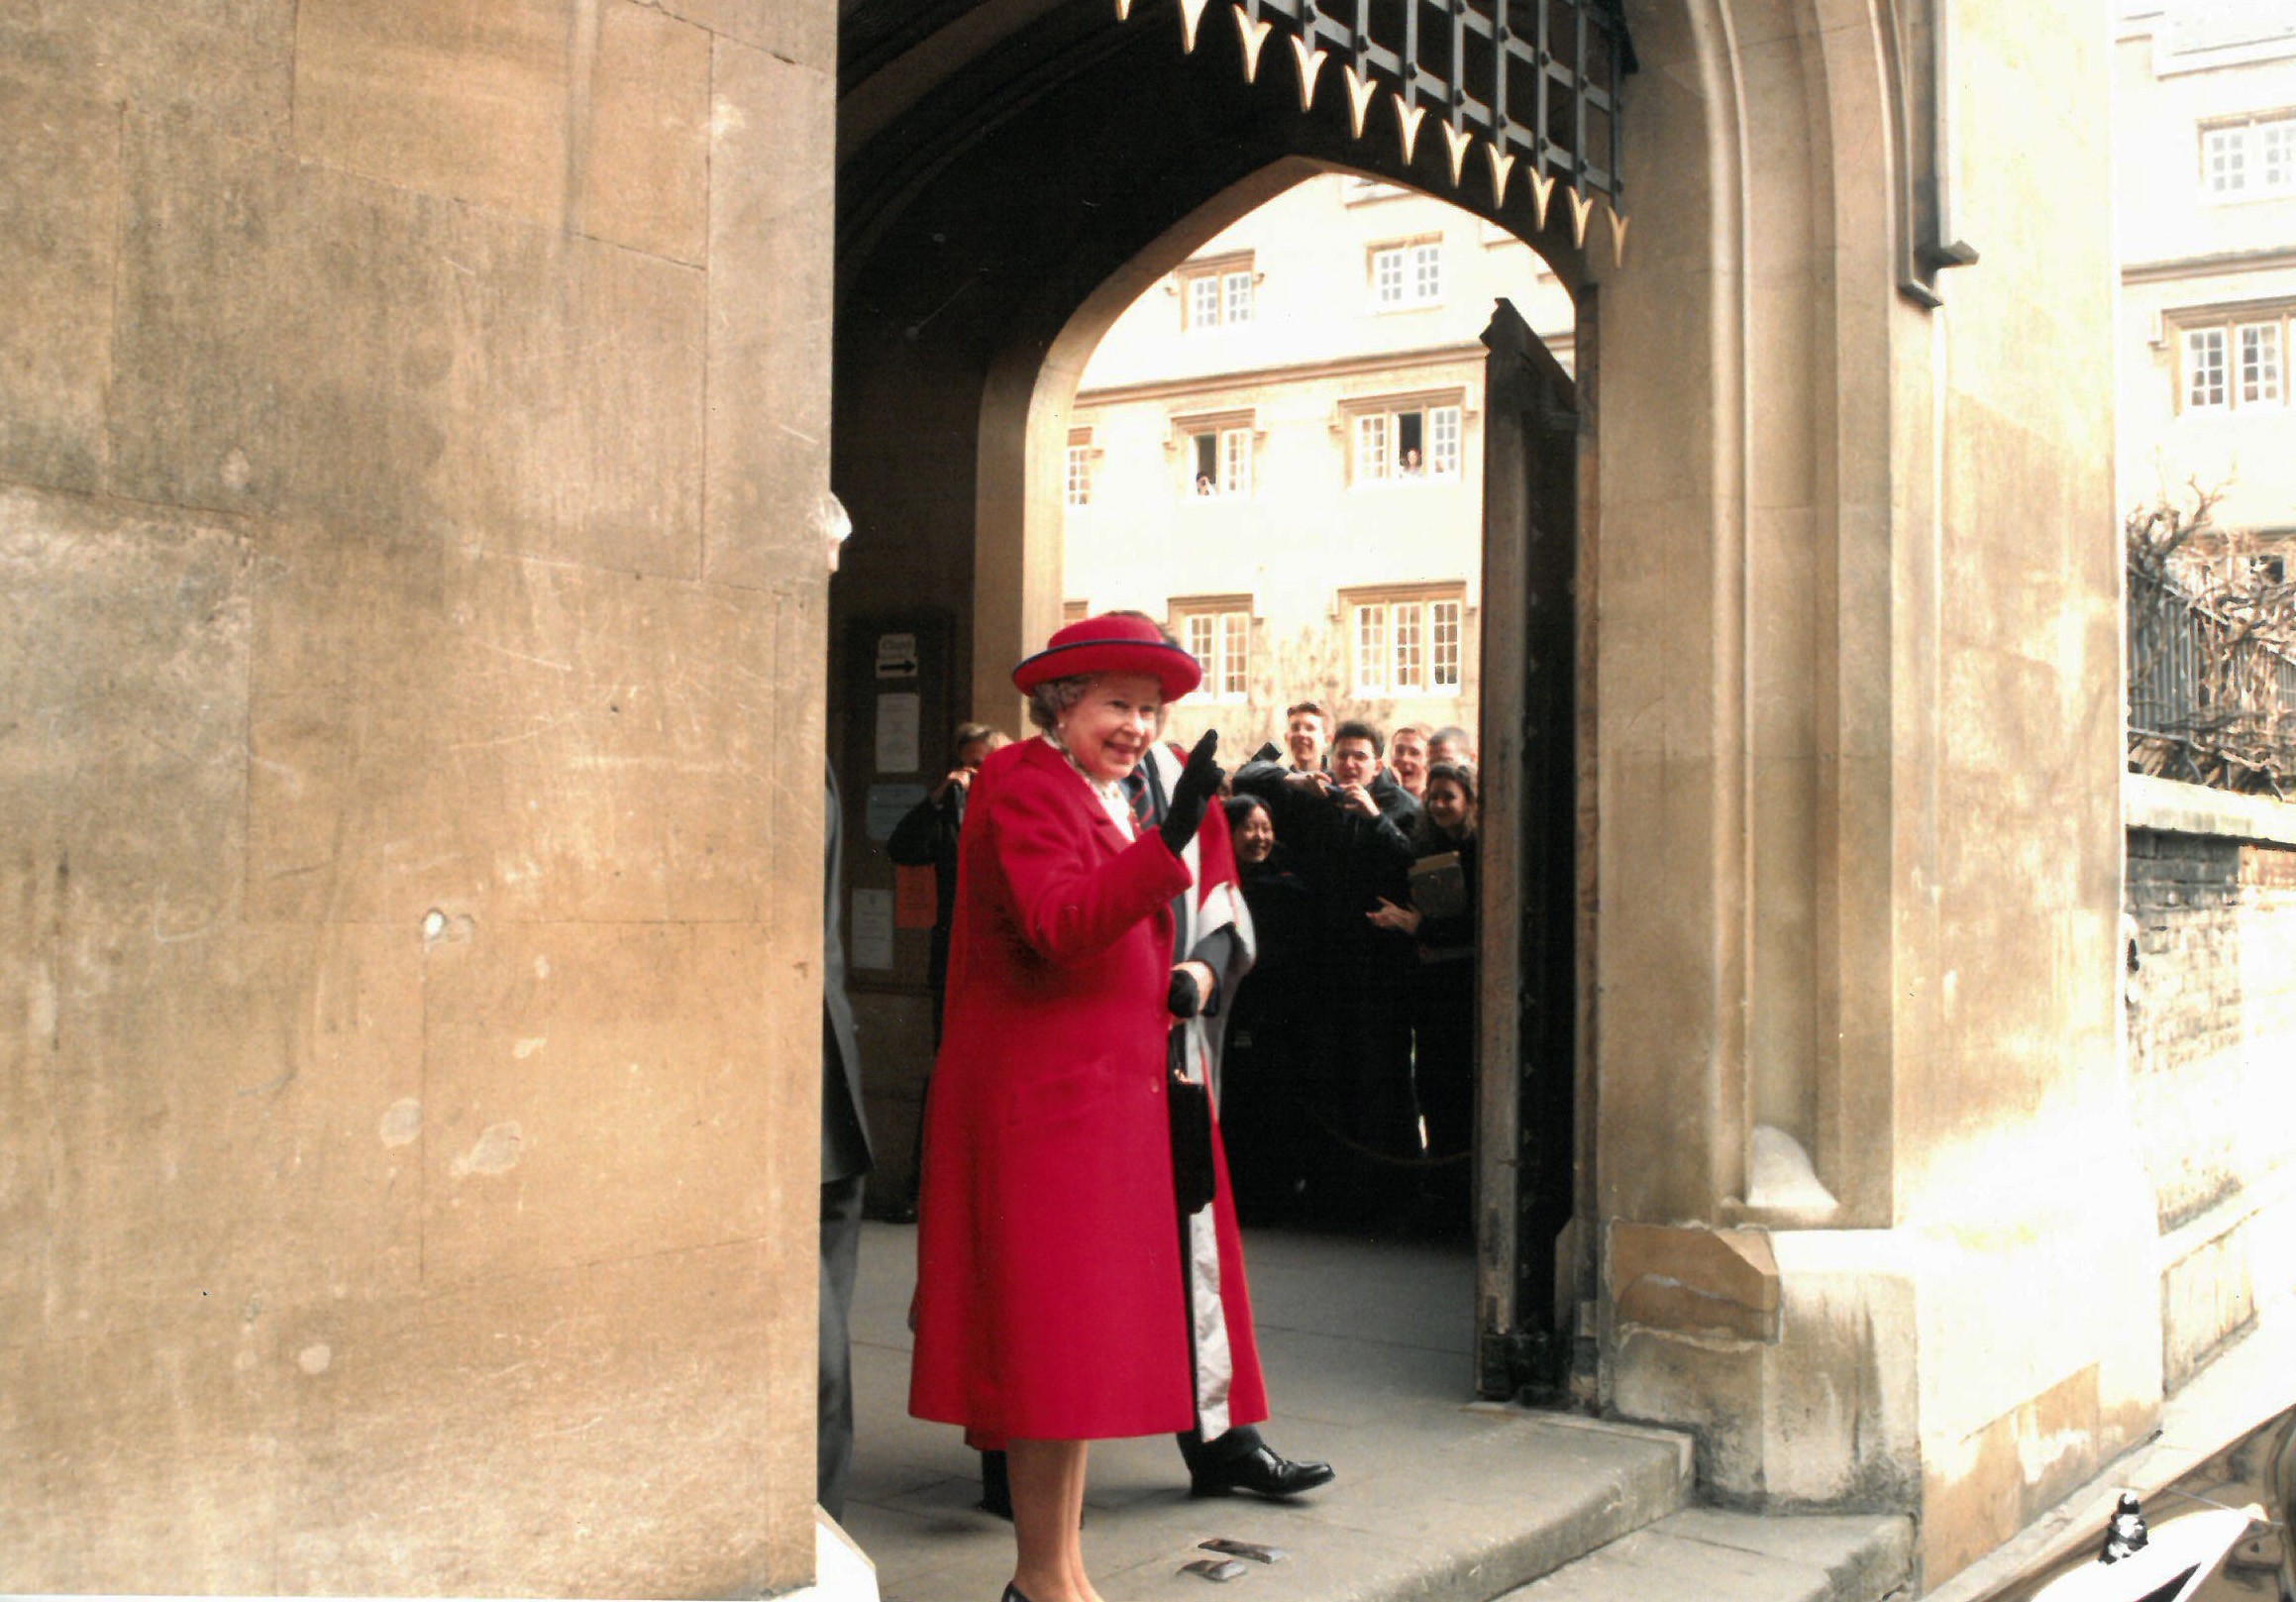 Her Majesty The Queen waving to the crowd during her visit to Sidney in 1996